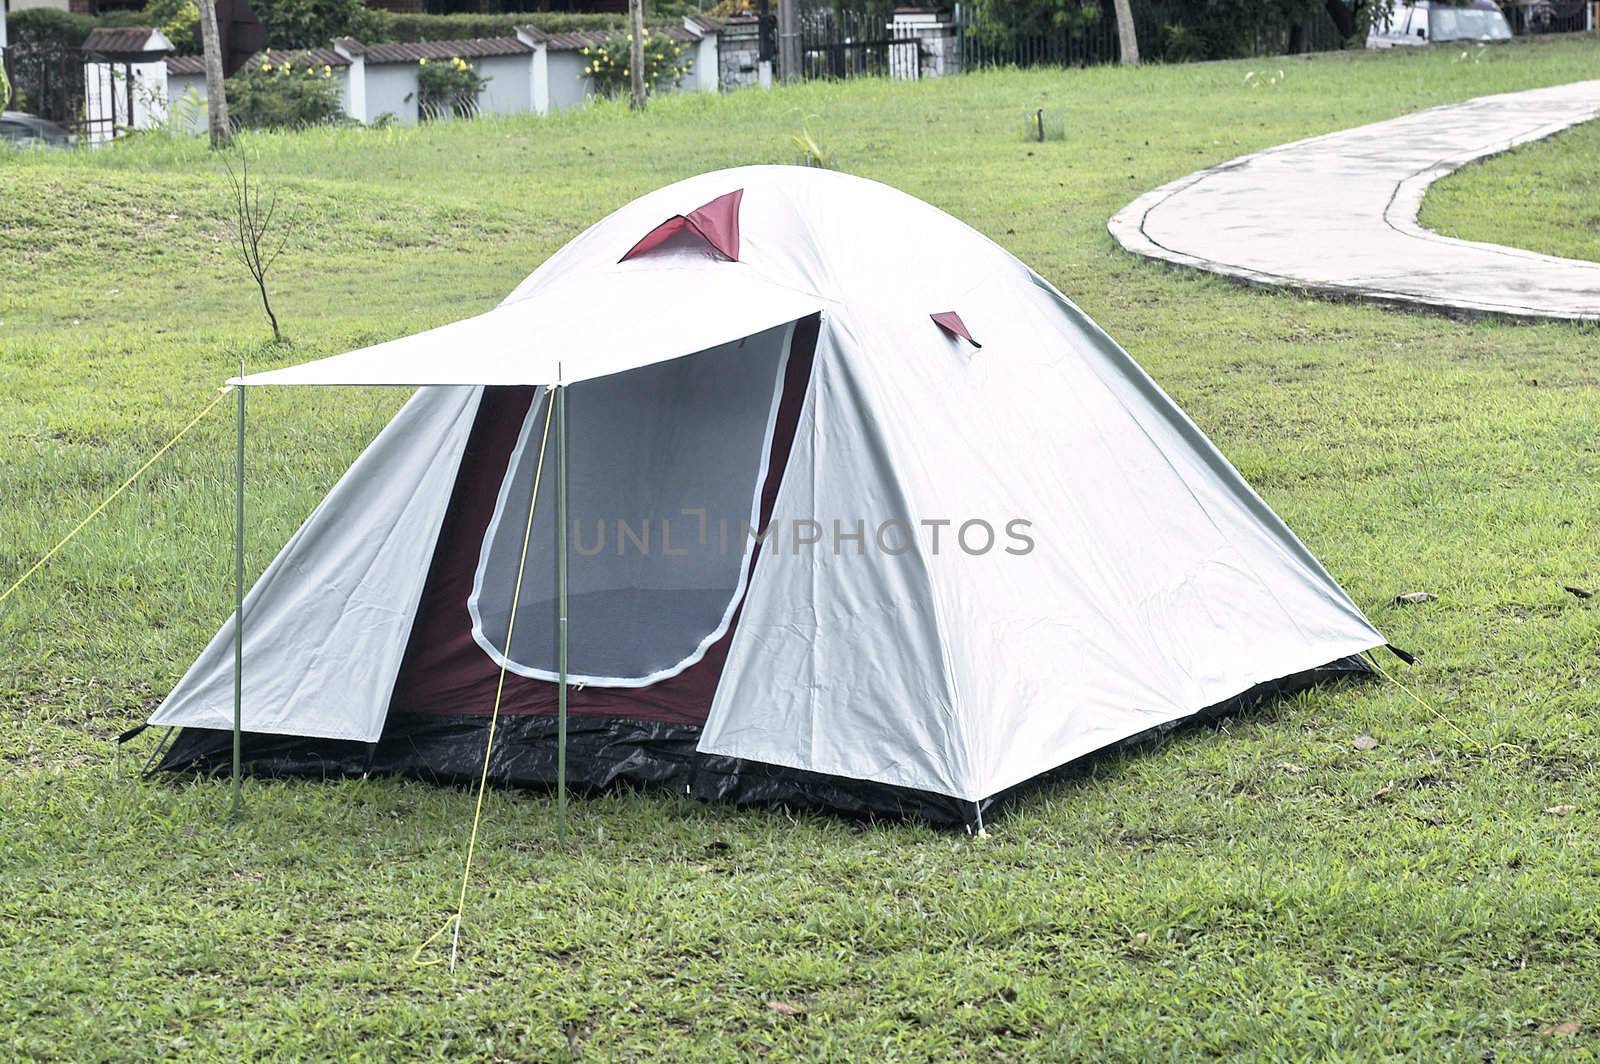 Camping tent on camping site.